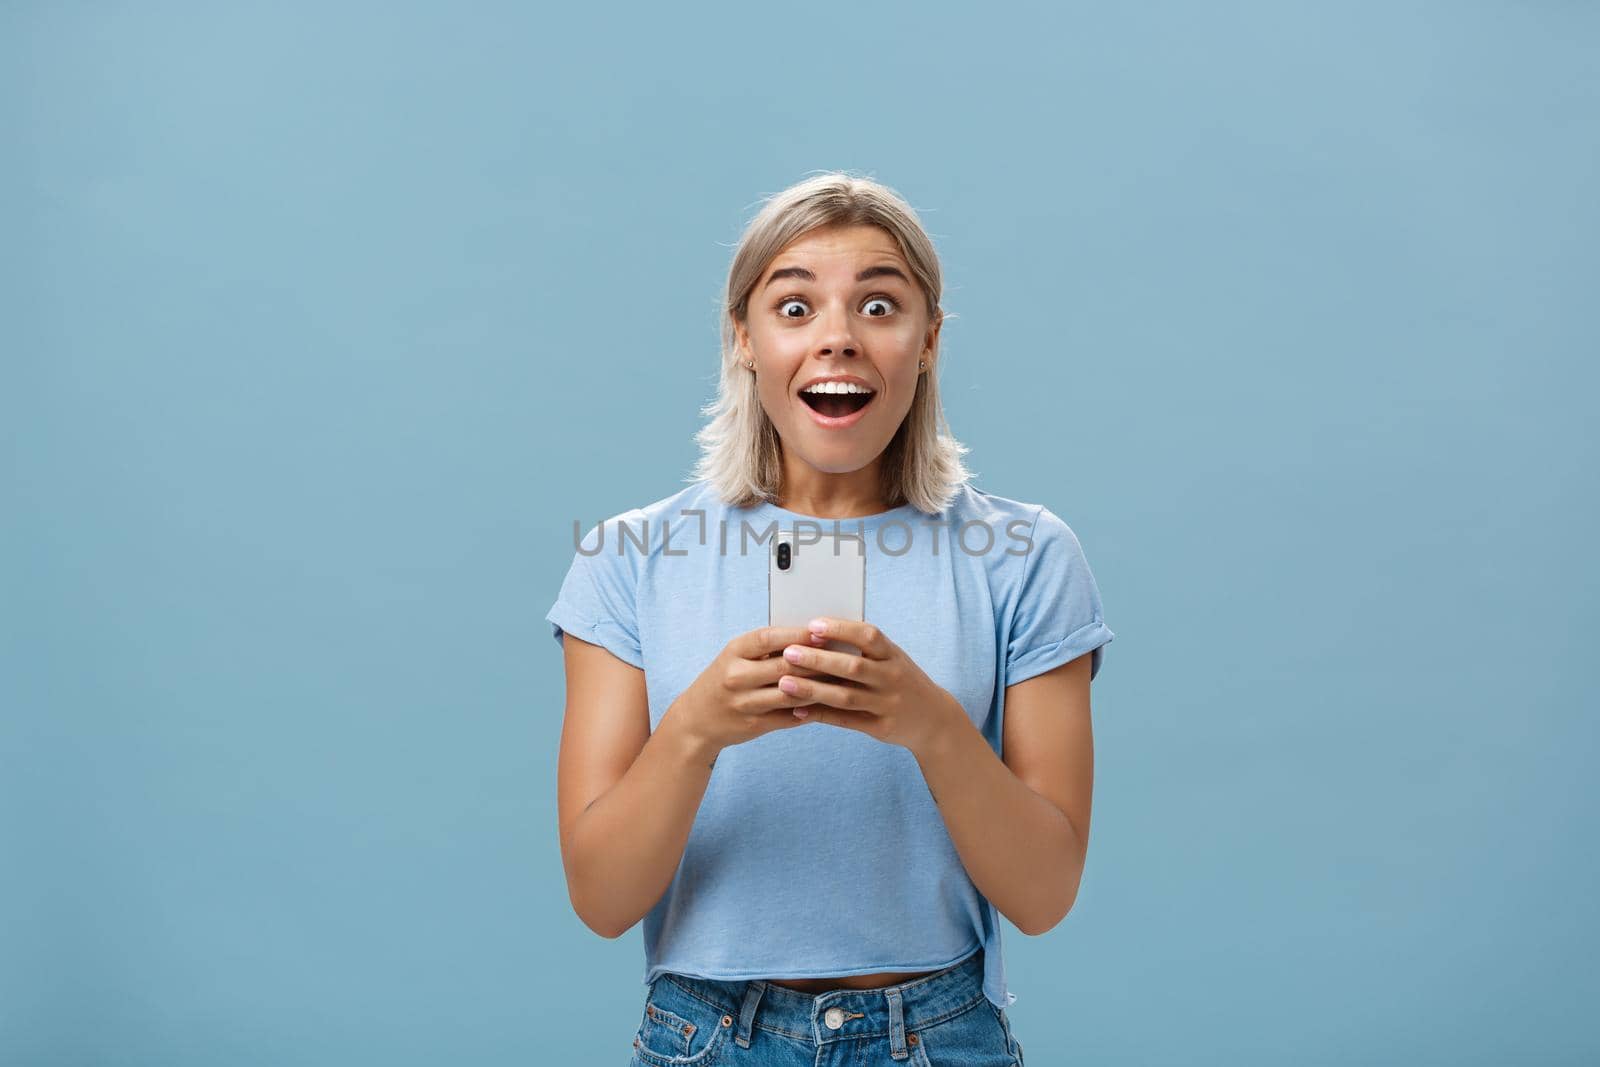 Lifestyle. Indoor shot of amazed attractive blonde female coworker in casual t-shirt gasping from amazement and happiness being surprised staring surprised at camera holding smartphone receiving awesome news.